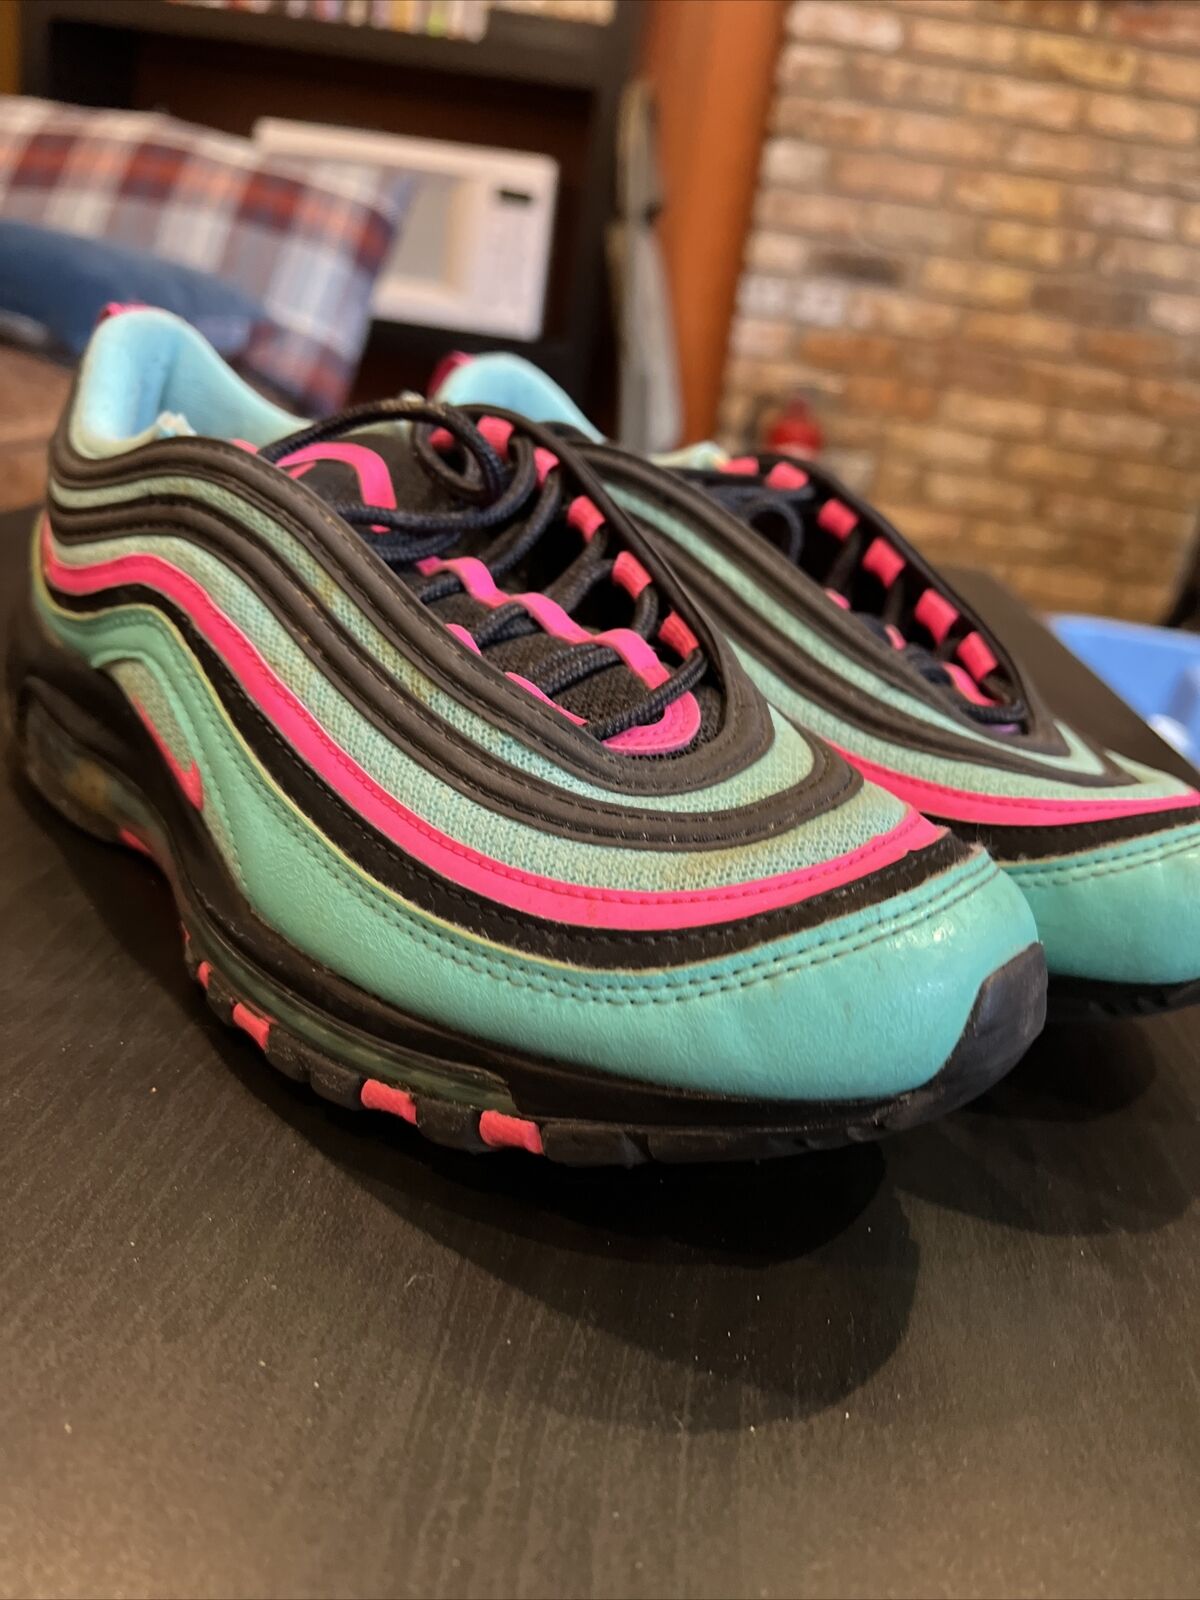 falskhed Trives acceptabel Pre-Owned Nike Air Max 97 Hyper Turquoise South Beach Size 8.5 | eBay